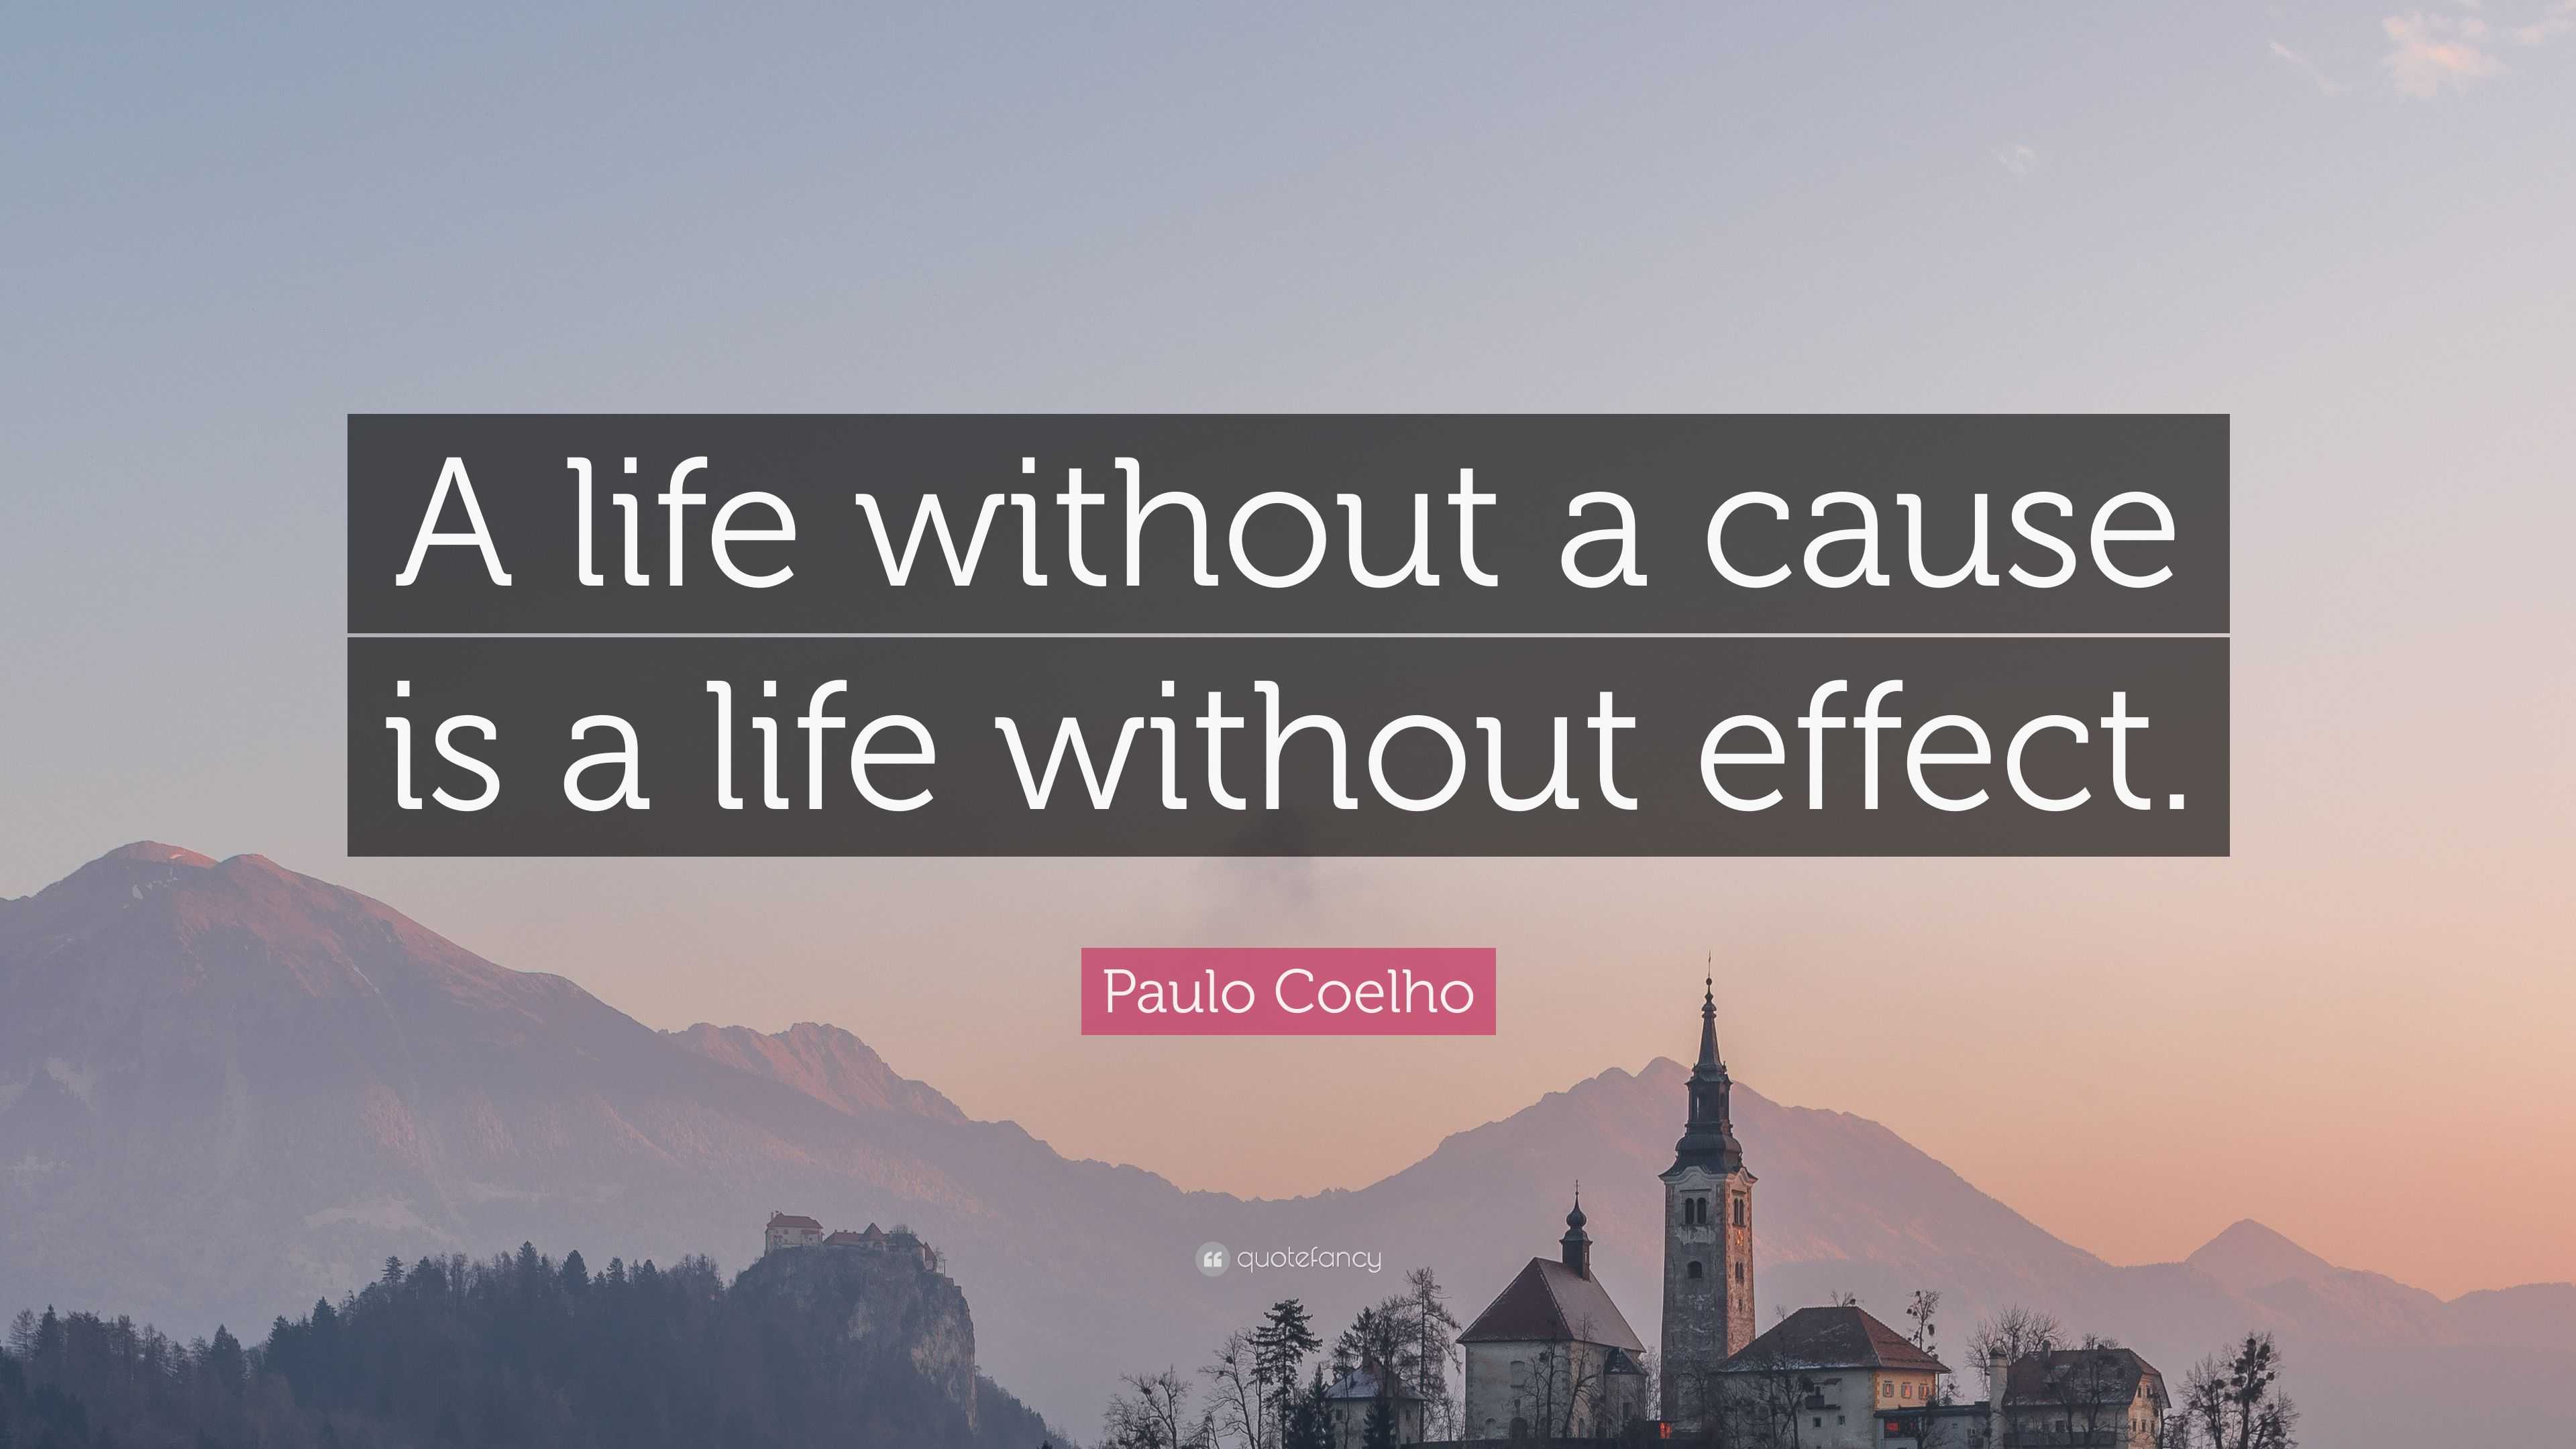 Paulo Coelho Quote: “A life without a cause is a life without effect.”